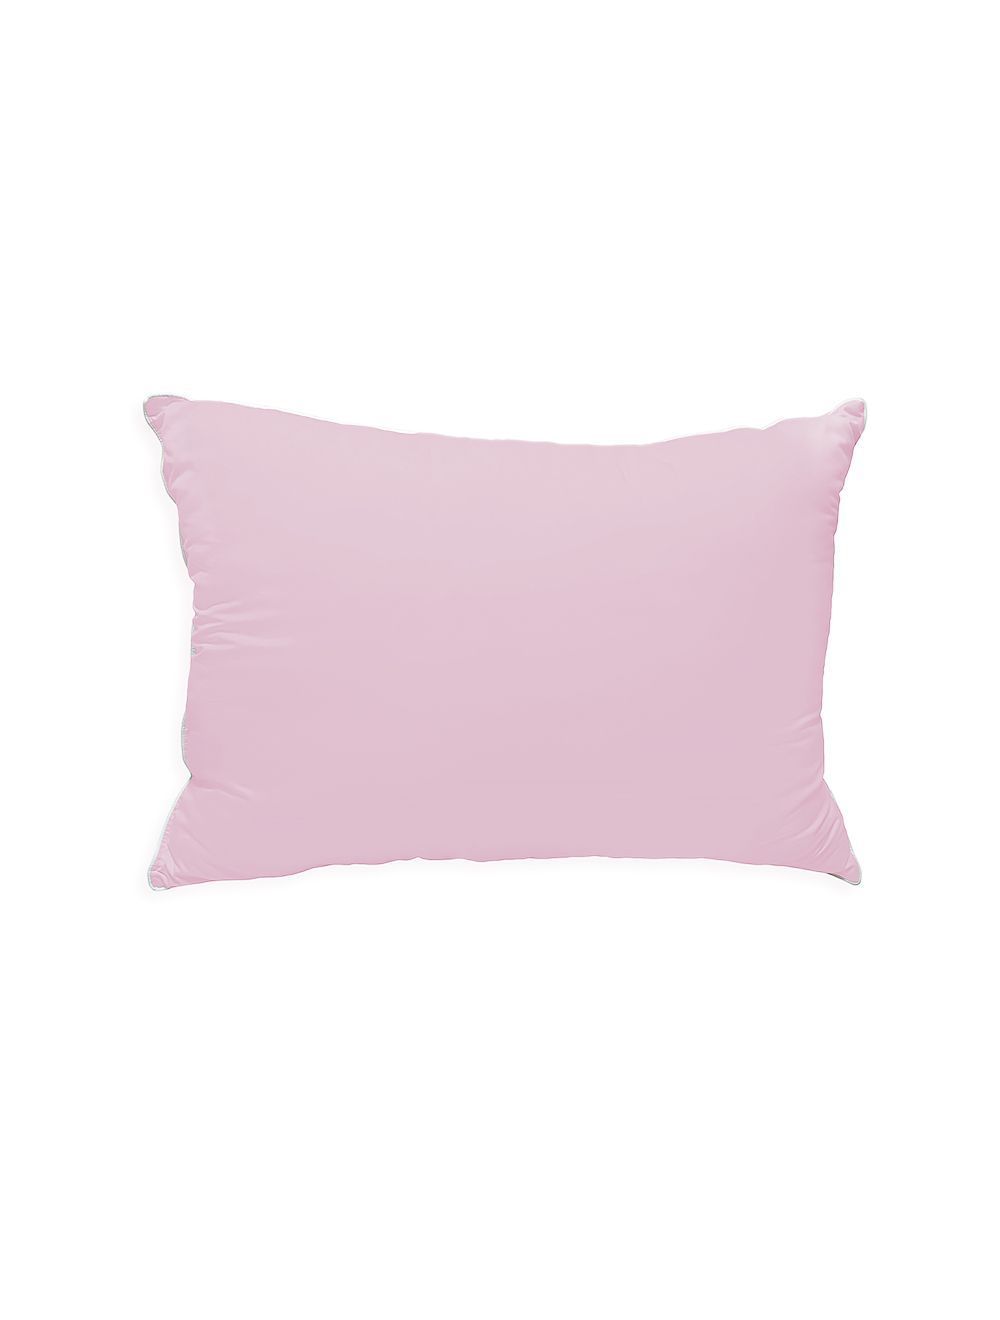 Rahalife Soft , Smooth Bed Pillow With White Piping Microfiber Pink 50x70cm-AW/PK/70